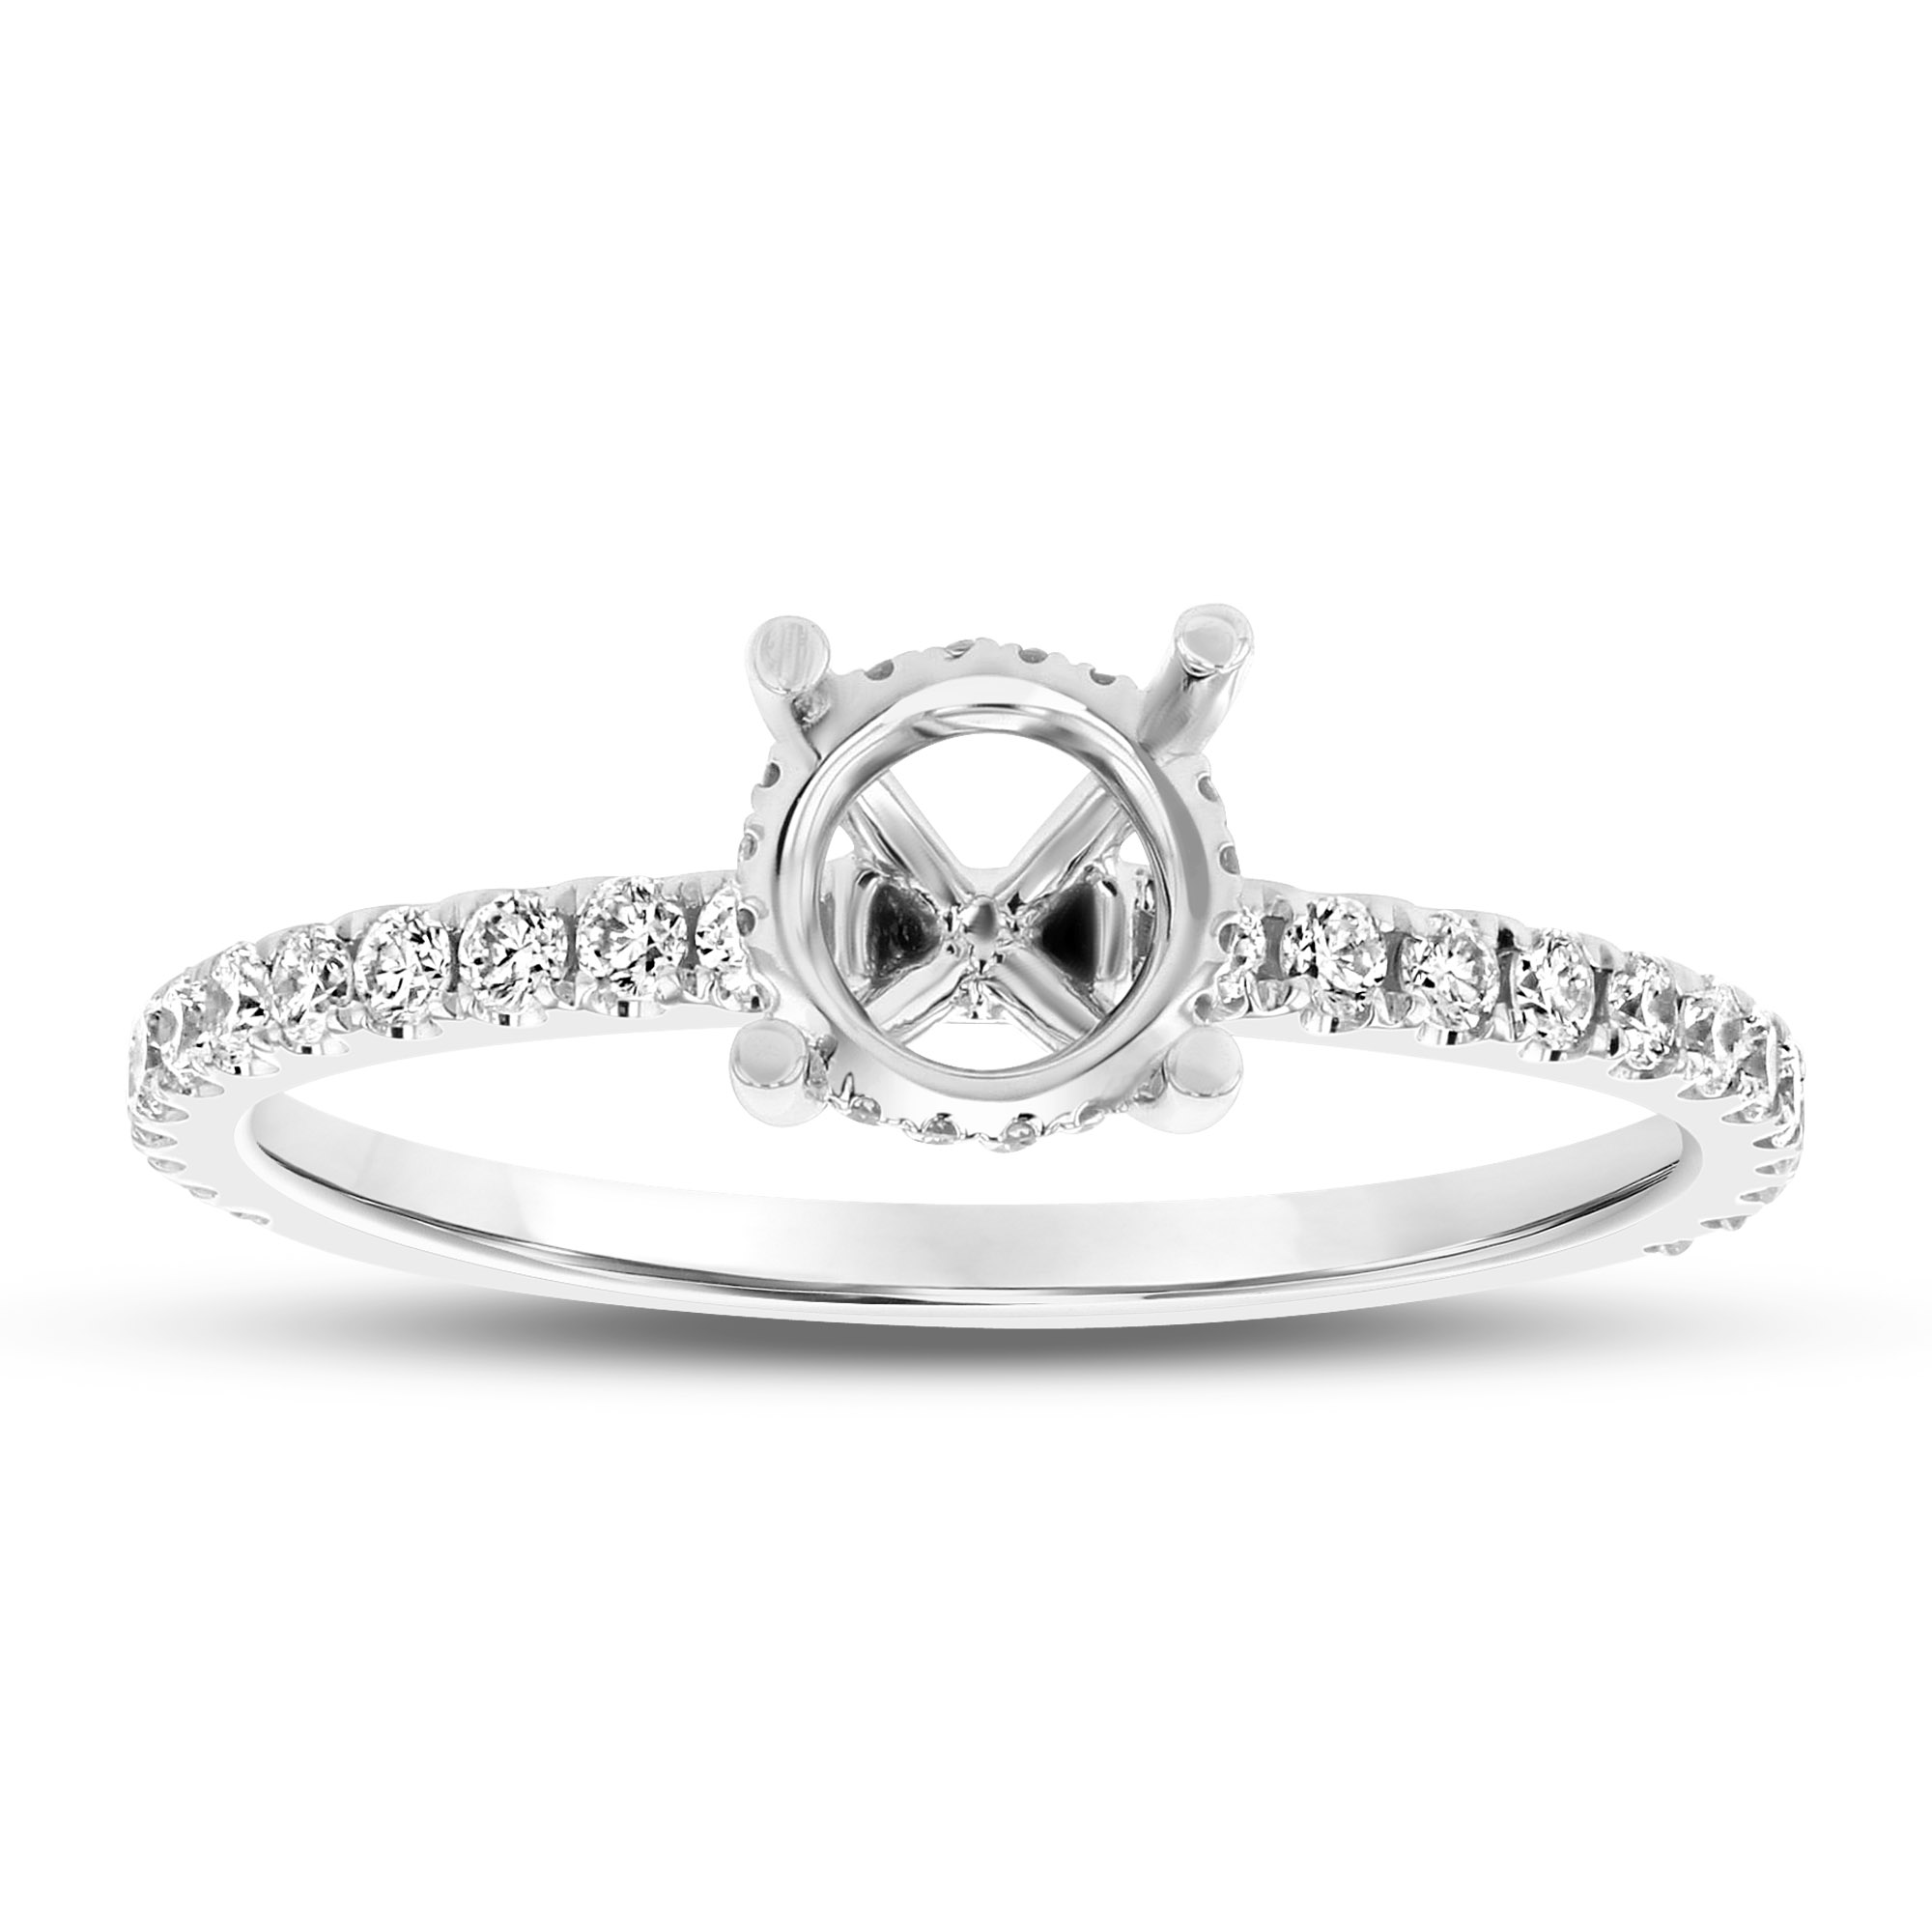 View 0.32ctw Diamond Under Halo Semi Mount Engagement Ring in 18k White Gold